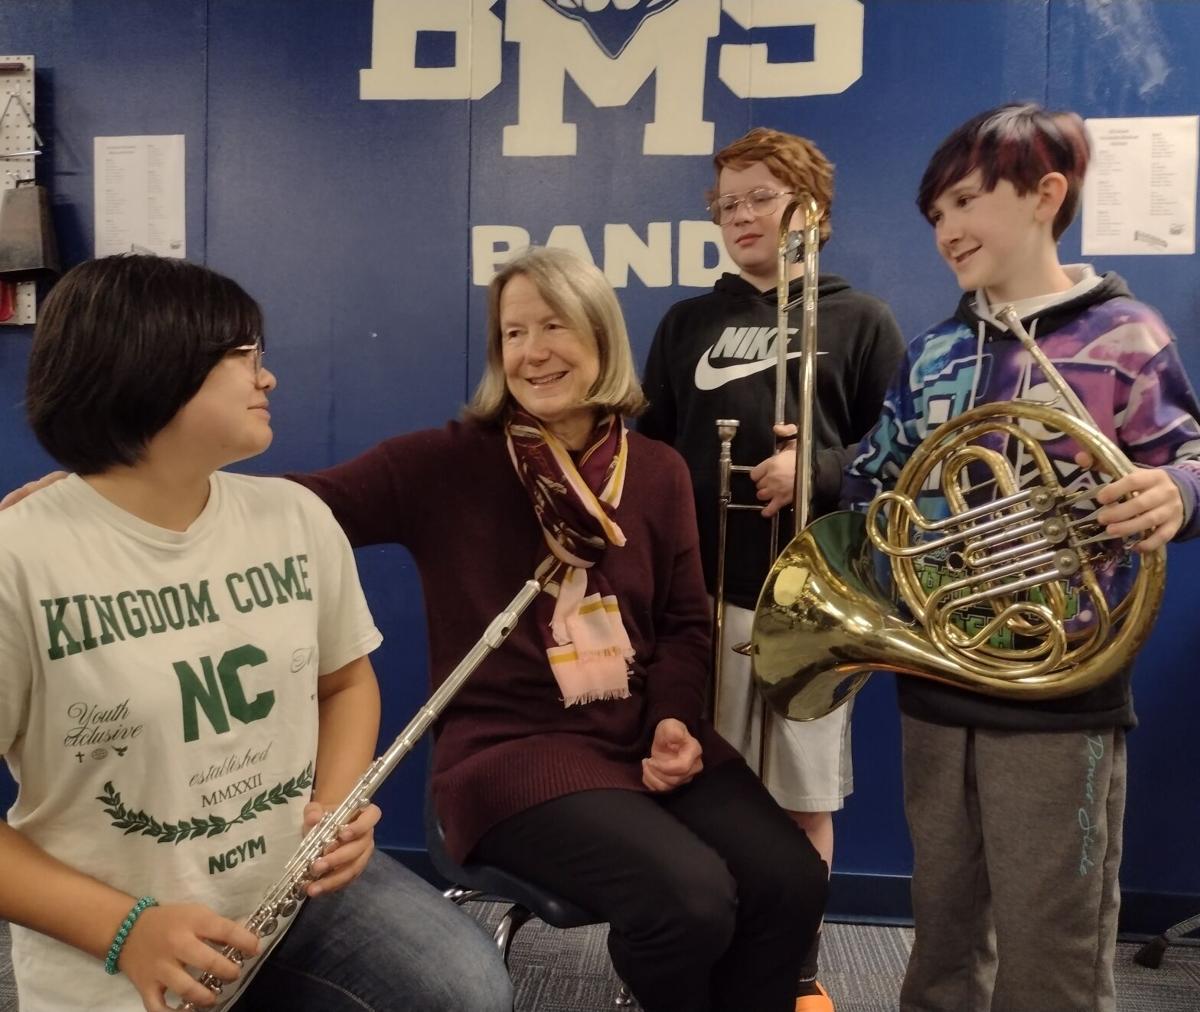 Help them play! Brevard Philharmonic seeks instrument donors for youth, News